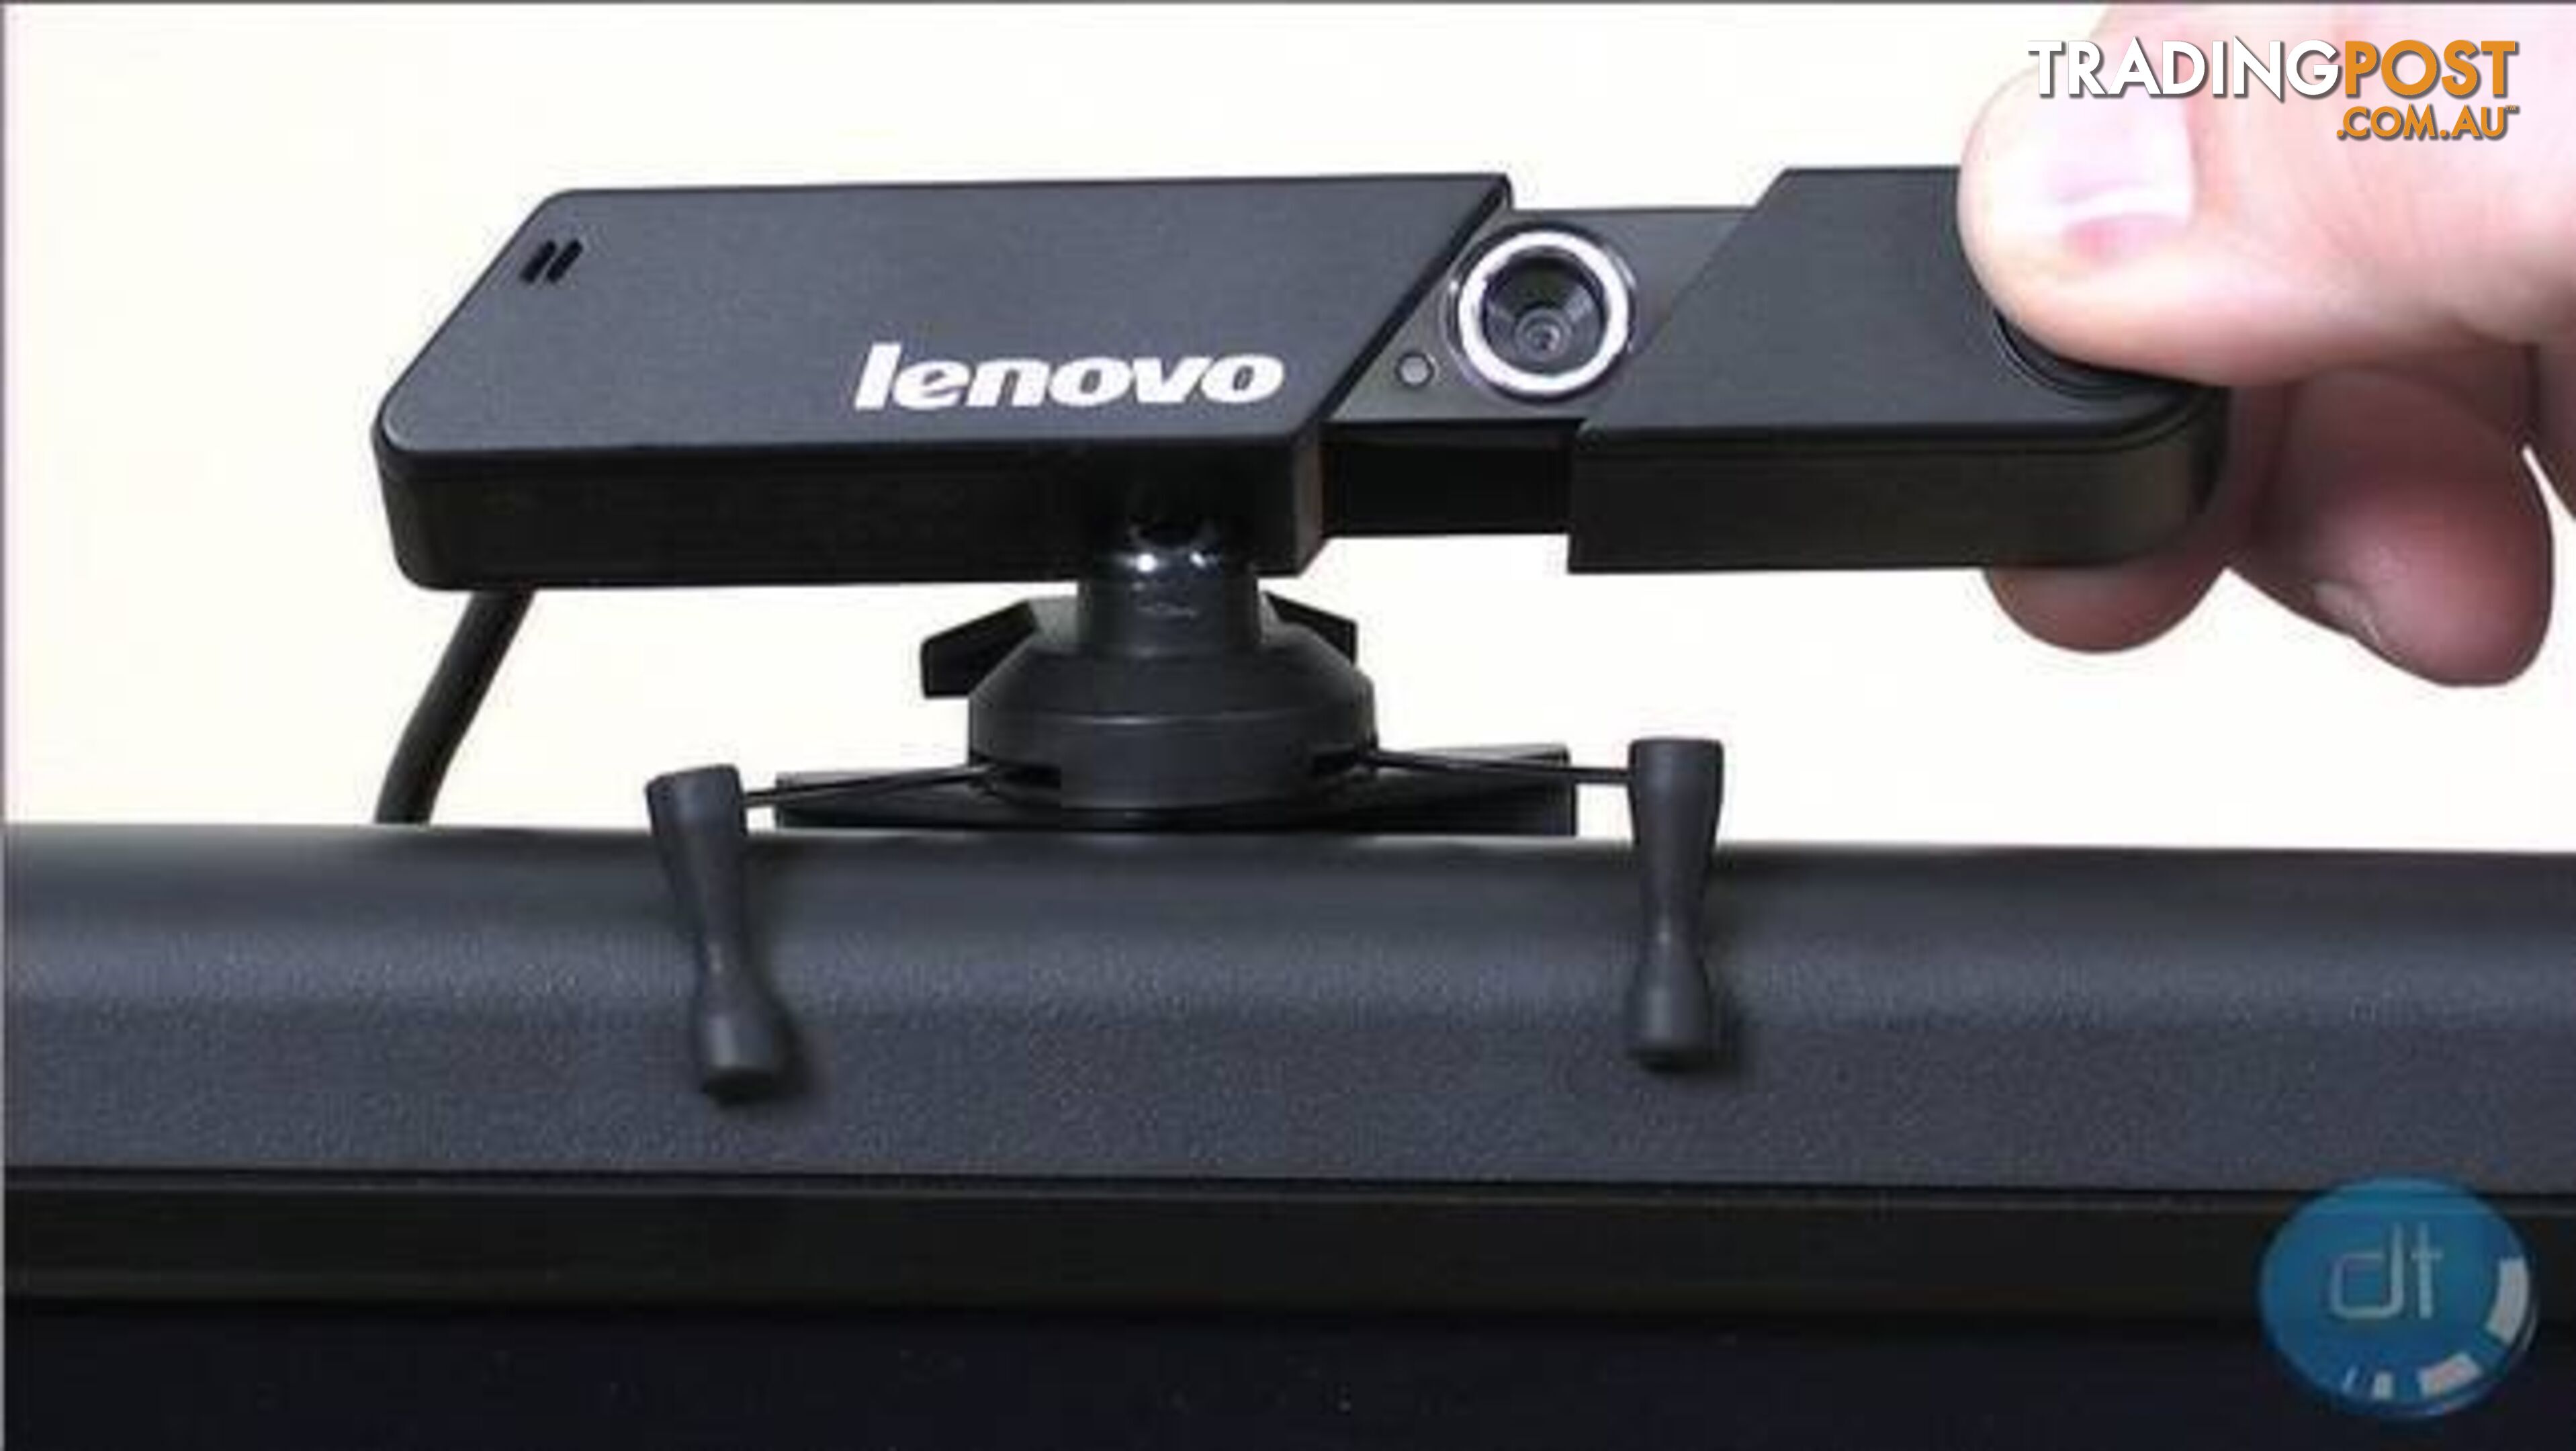 LENOVO WEB CAMERA AS NEW CONDITION PICKUP CLAYTON 3168 OR POST